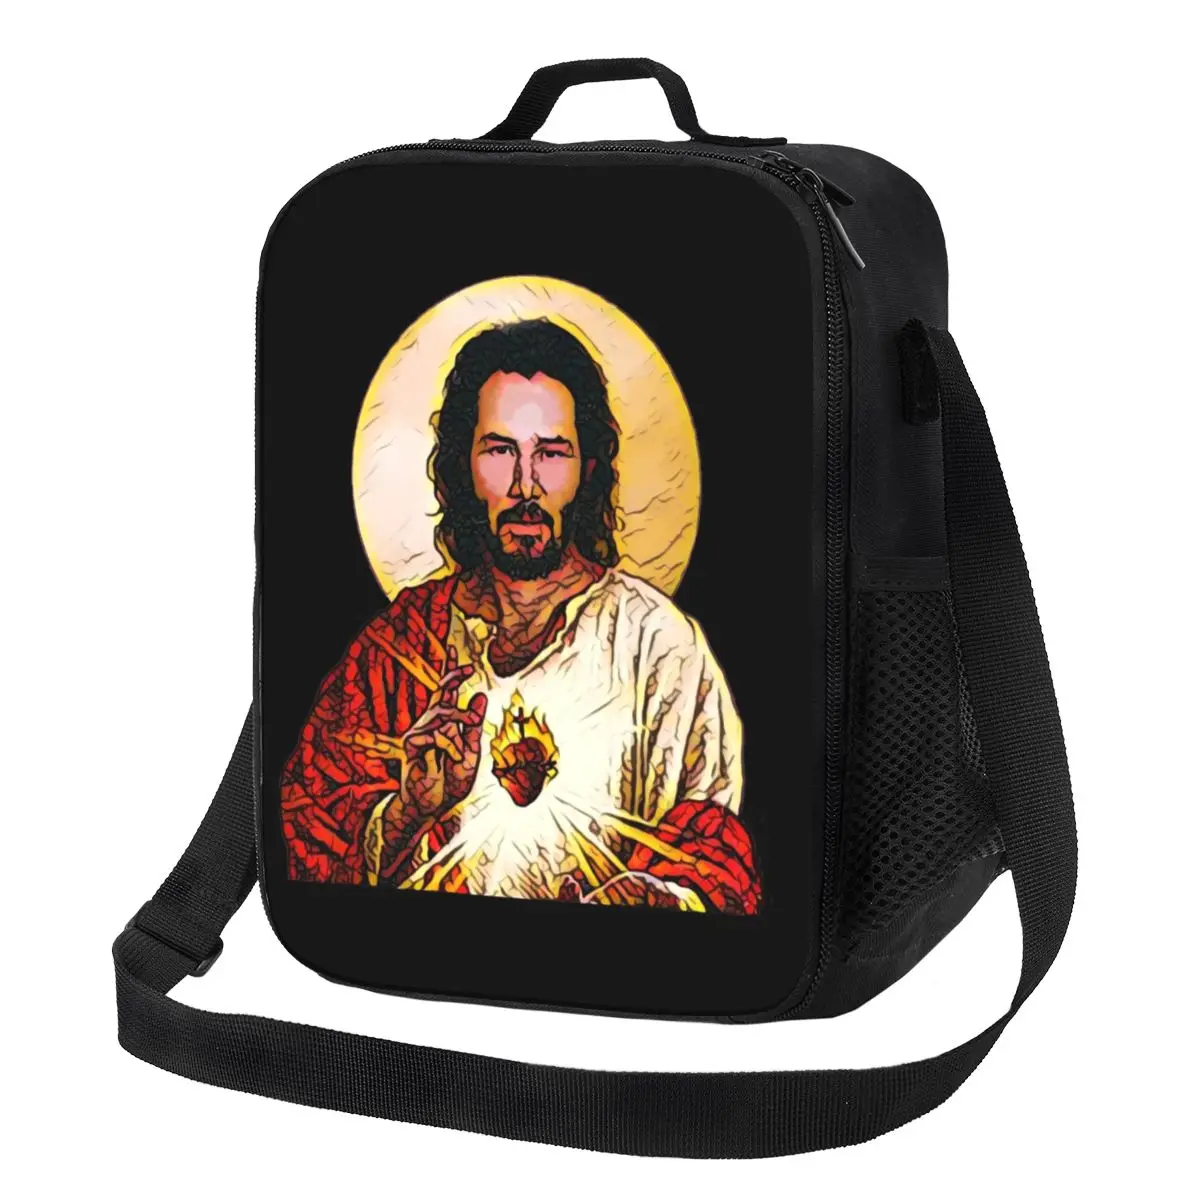 

Holy Keanu Reeves Thermal Insulated Lunch Bag Actor John Wick Resuable Lunch Container for School Multifunction Bento Food Box